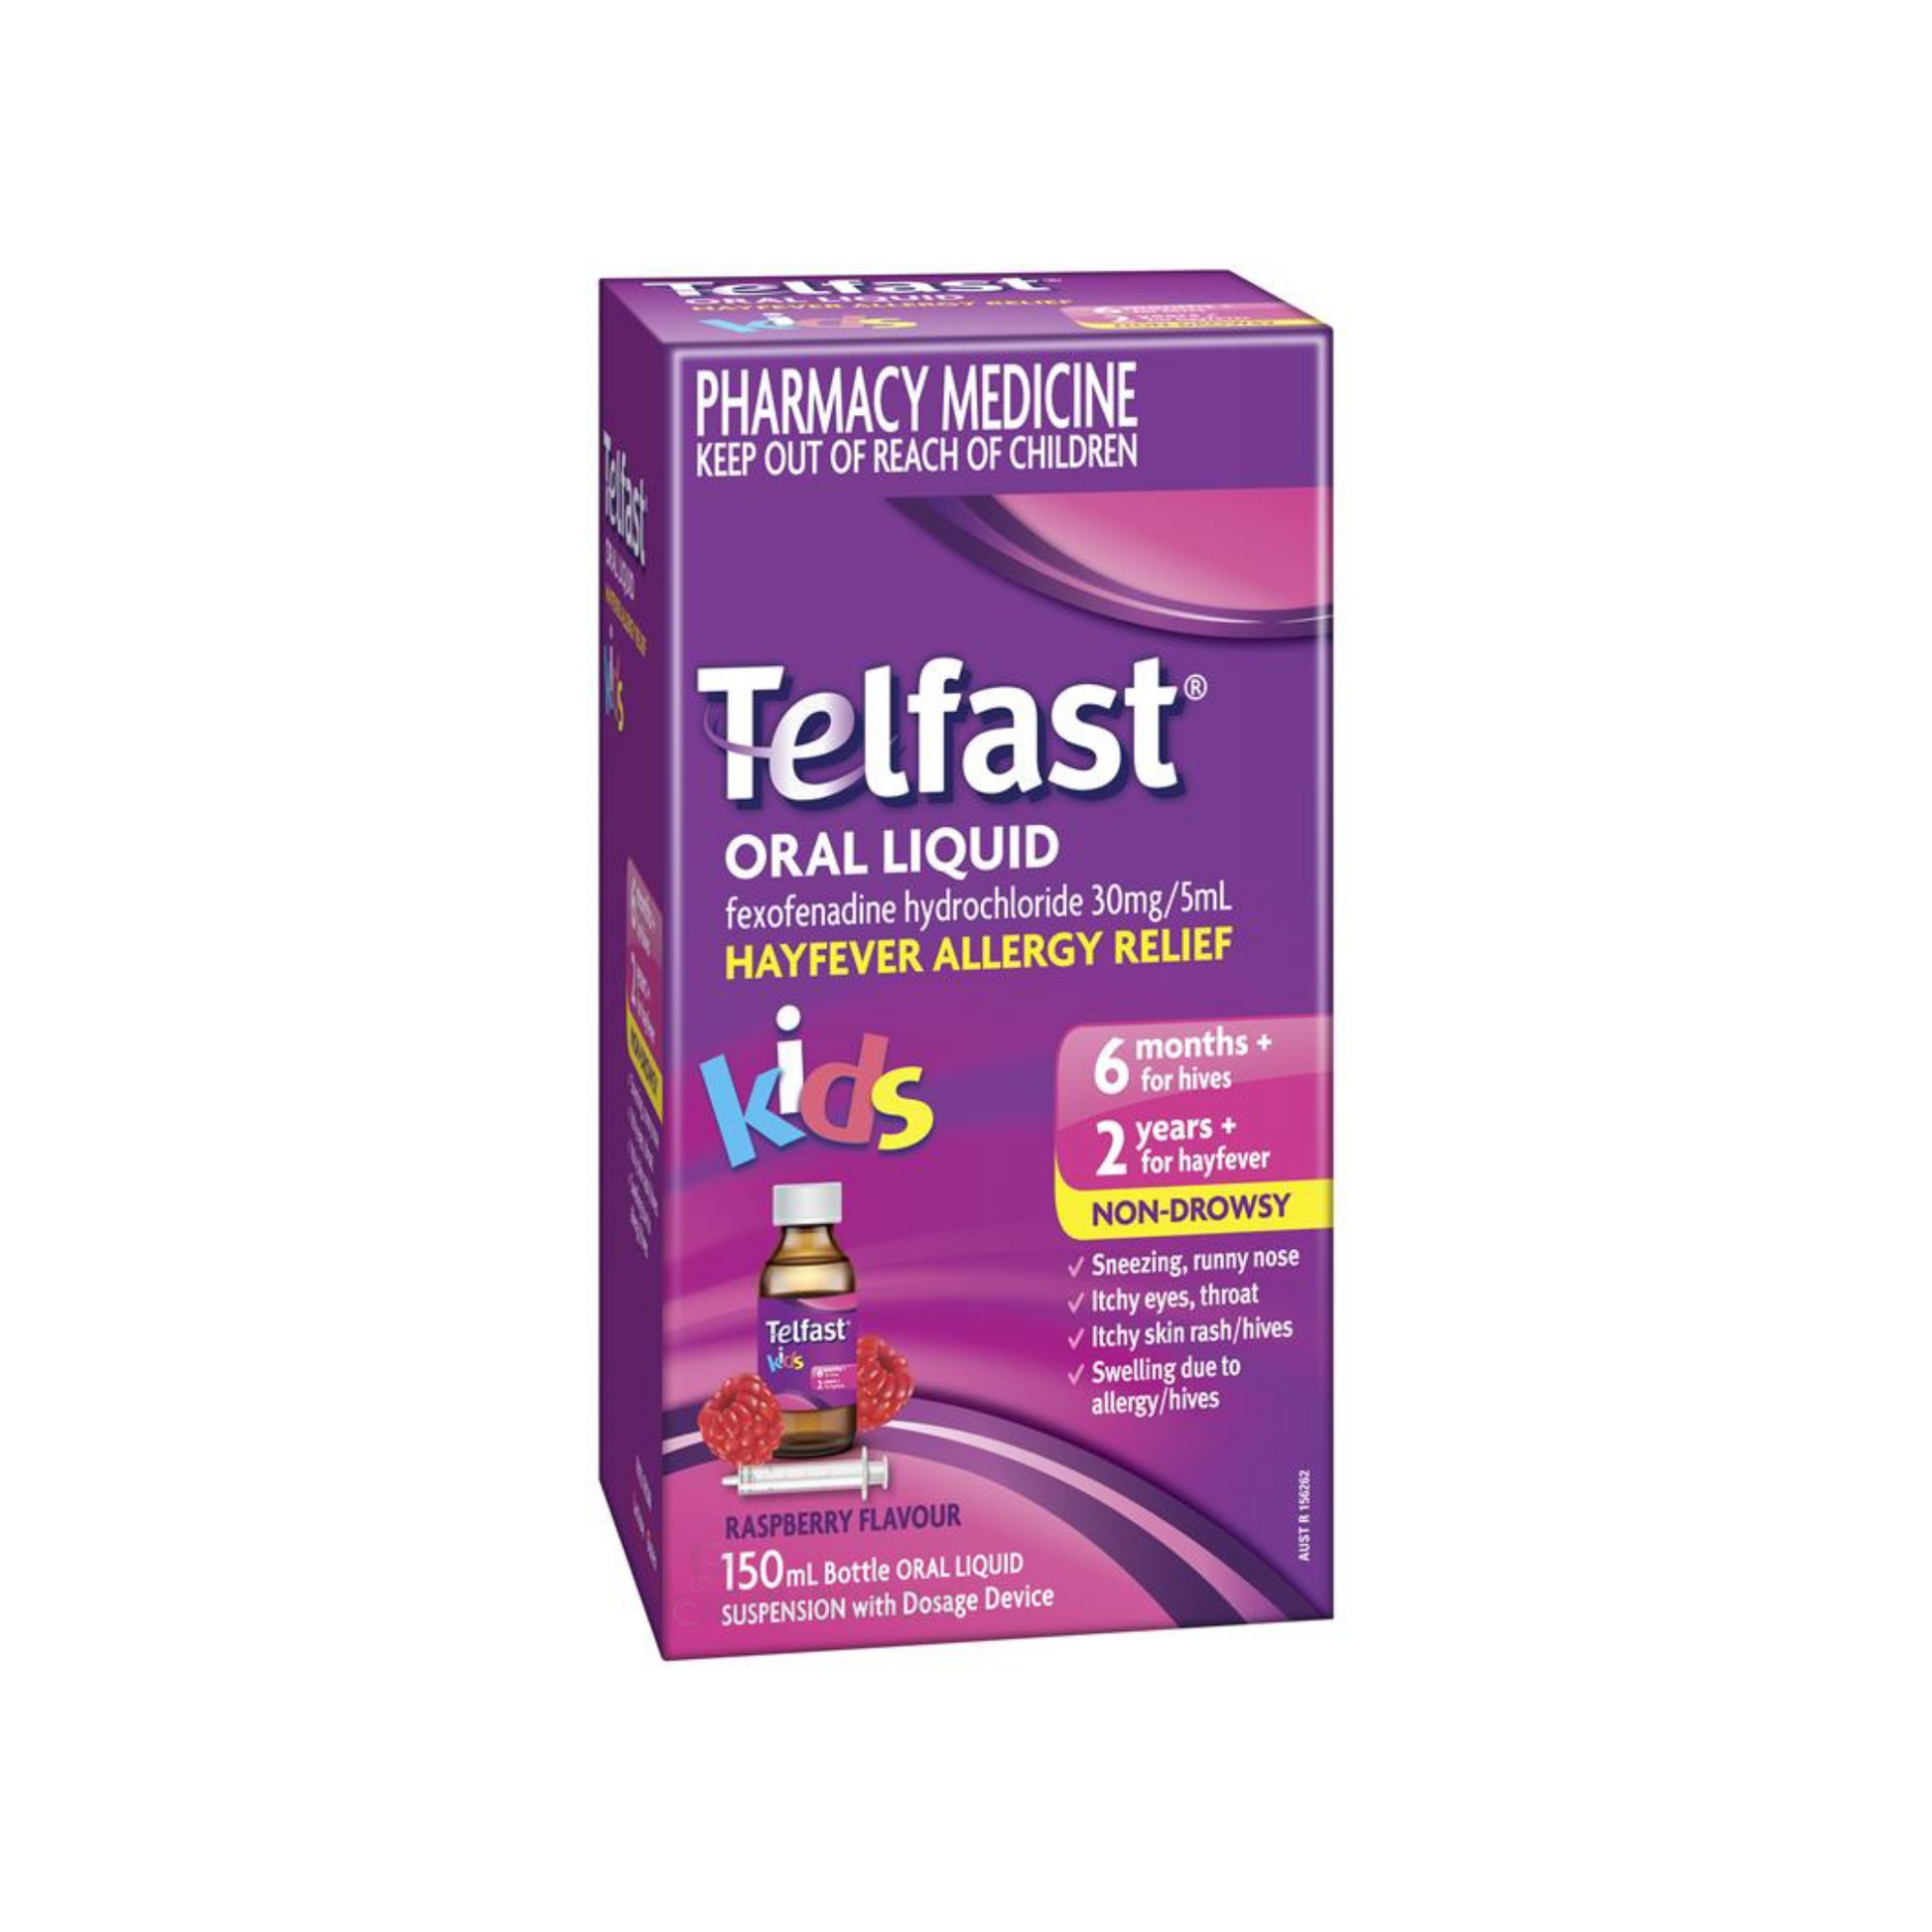 Telfast Hayfever Allergy Relief Kids Antihistamine Oral Liquid is a fast, non drowsy 12 hour relief of the symptoms of hayfever & year round allergies. Best imported foreign Australian Aussie genuine authentic premium quality real healthy baby care health medicine rash price in Dhaka Chittagong Sylhet Bangladesh.